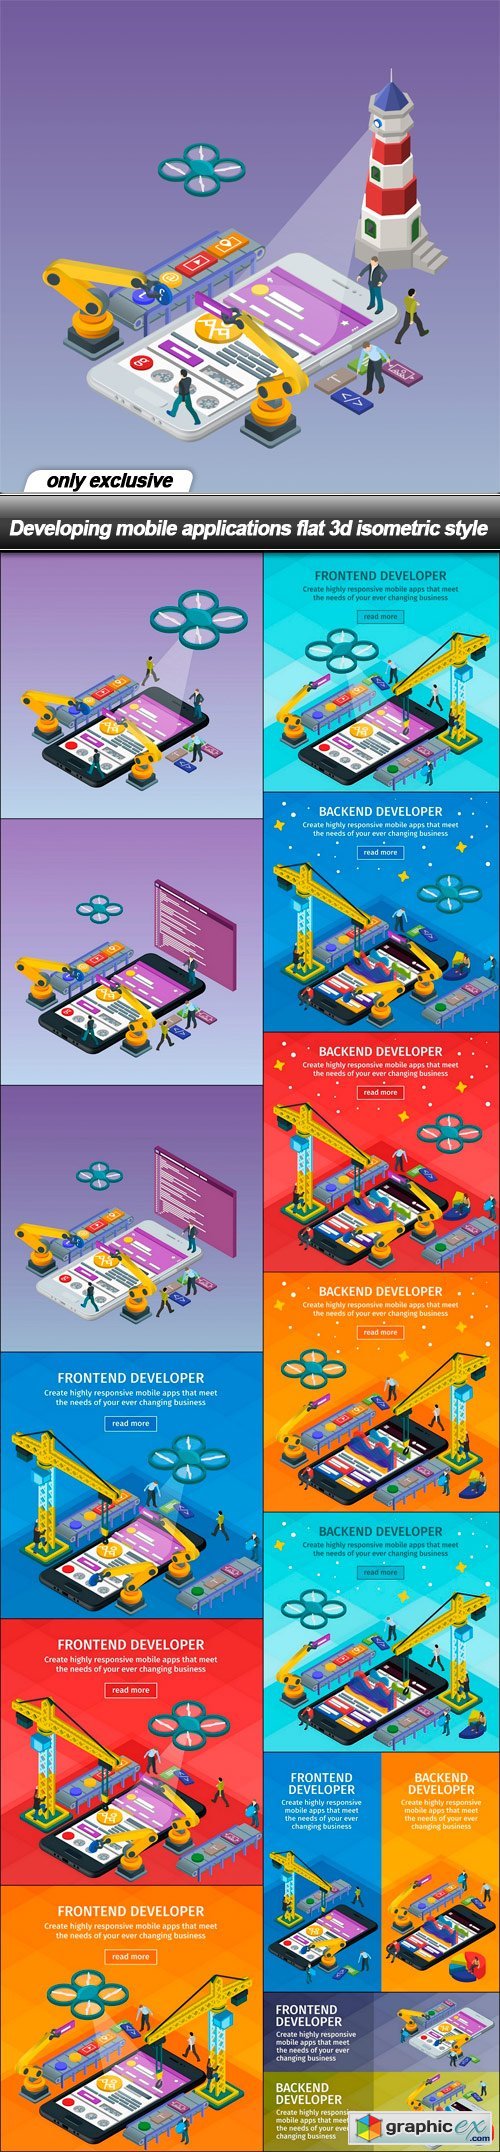 Developing mobile applications flat 3d isometric style - 14 EPS